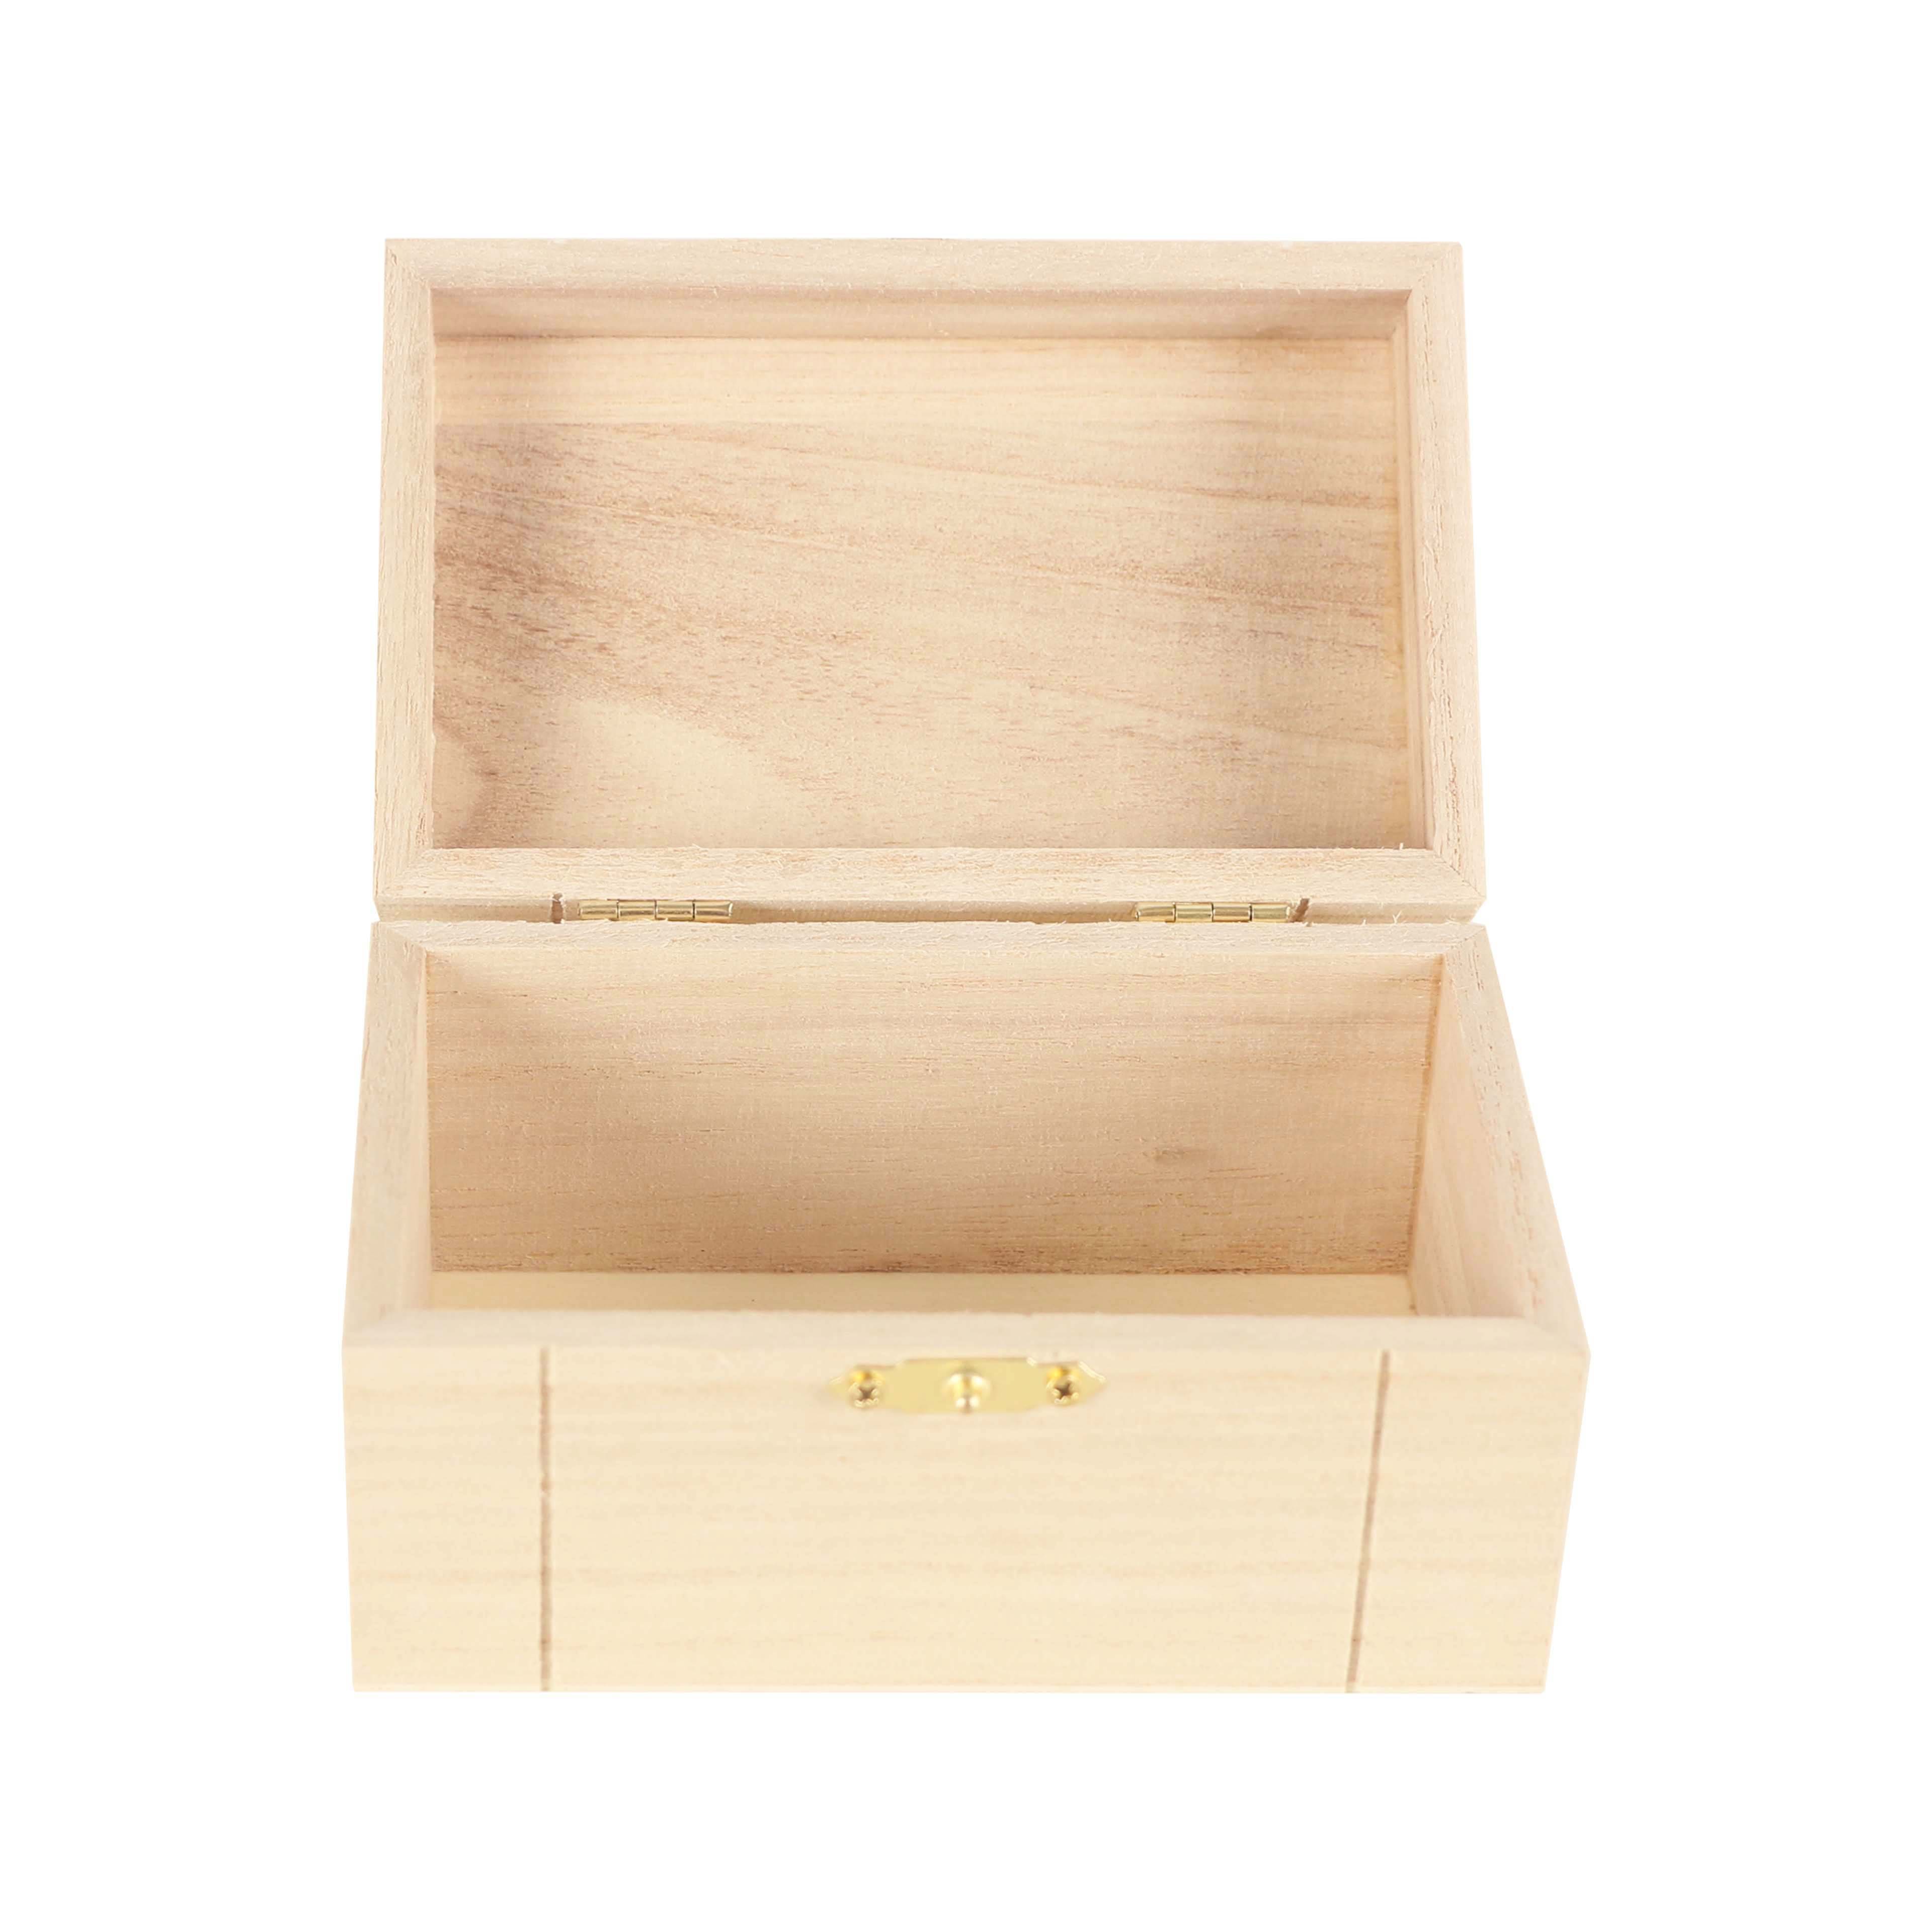 5 Wood Treasure Chest by Make Market®